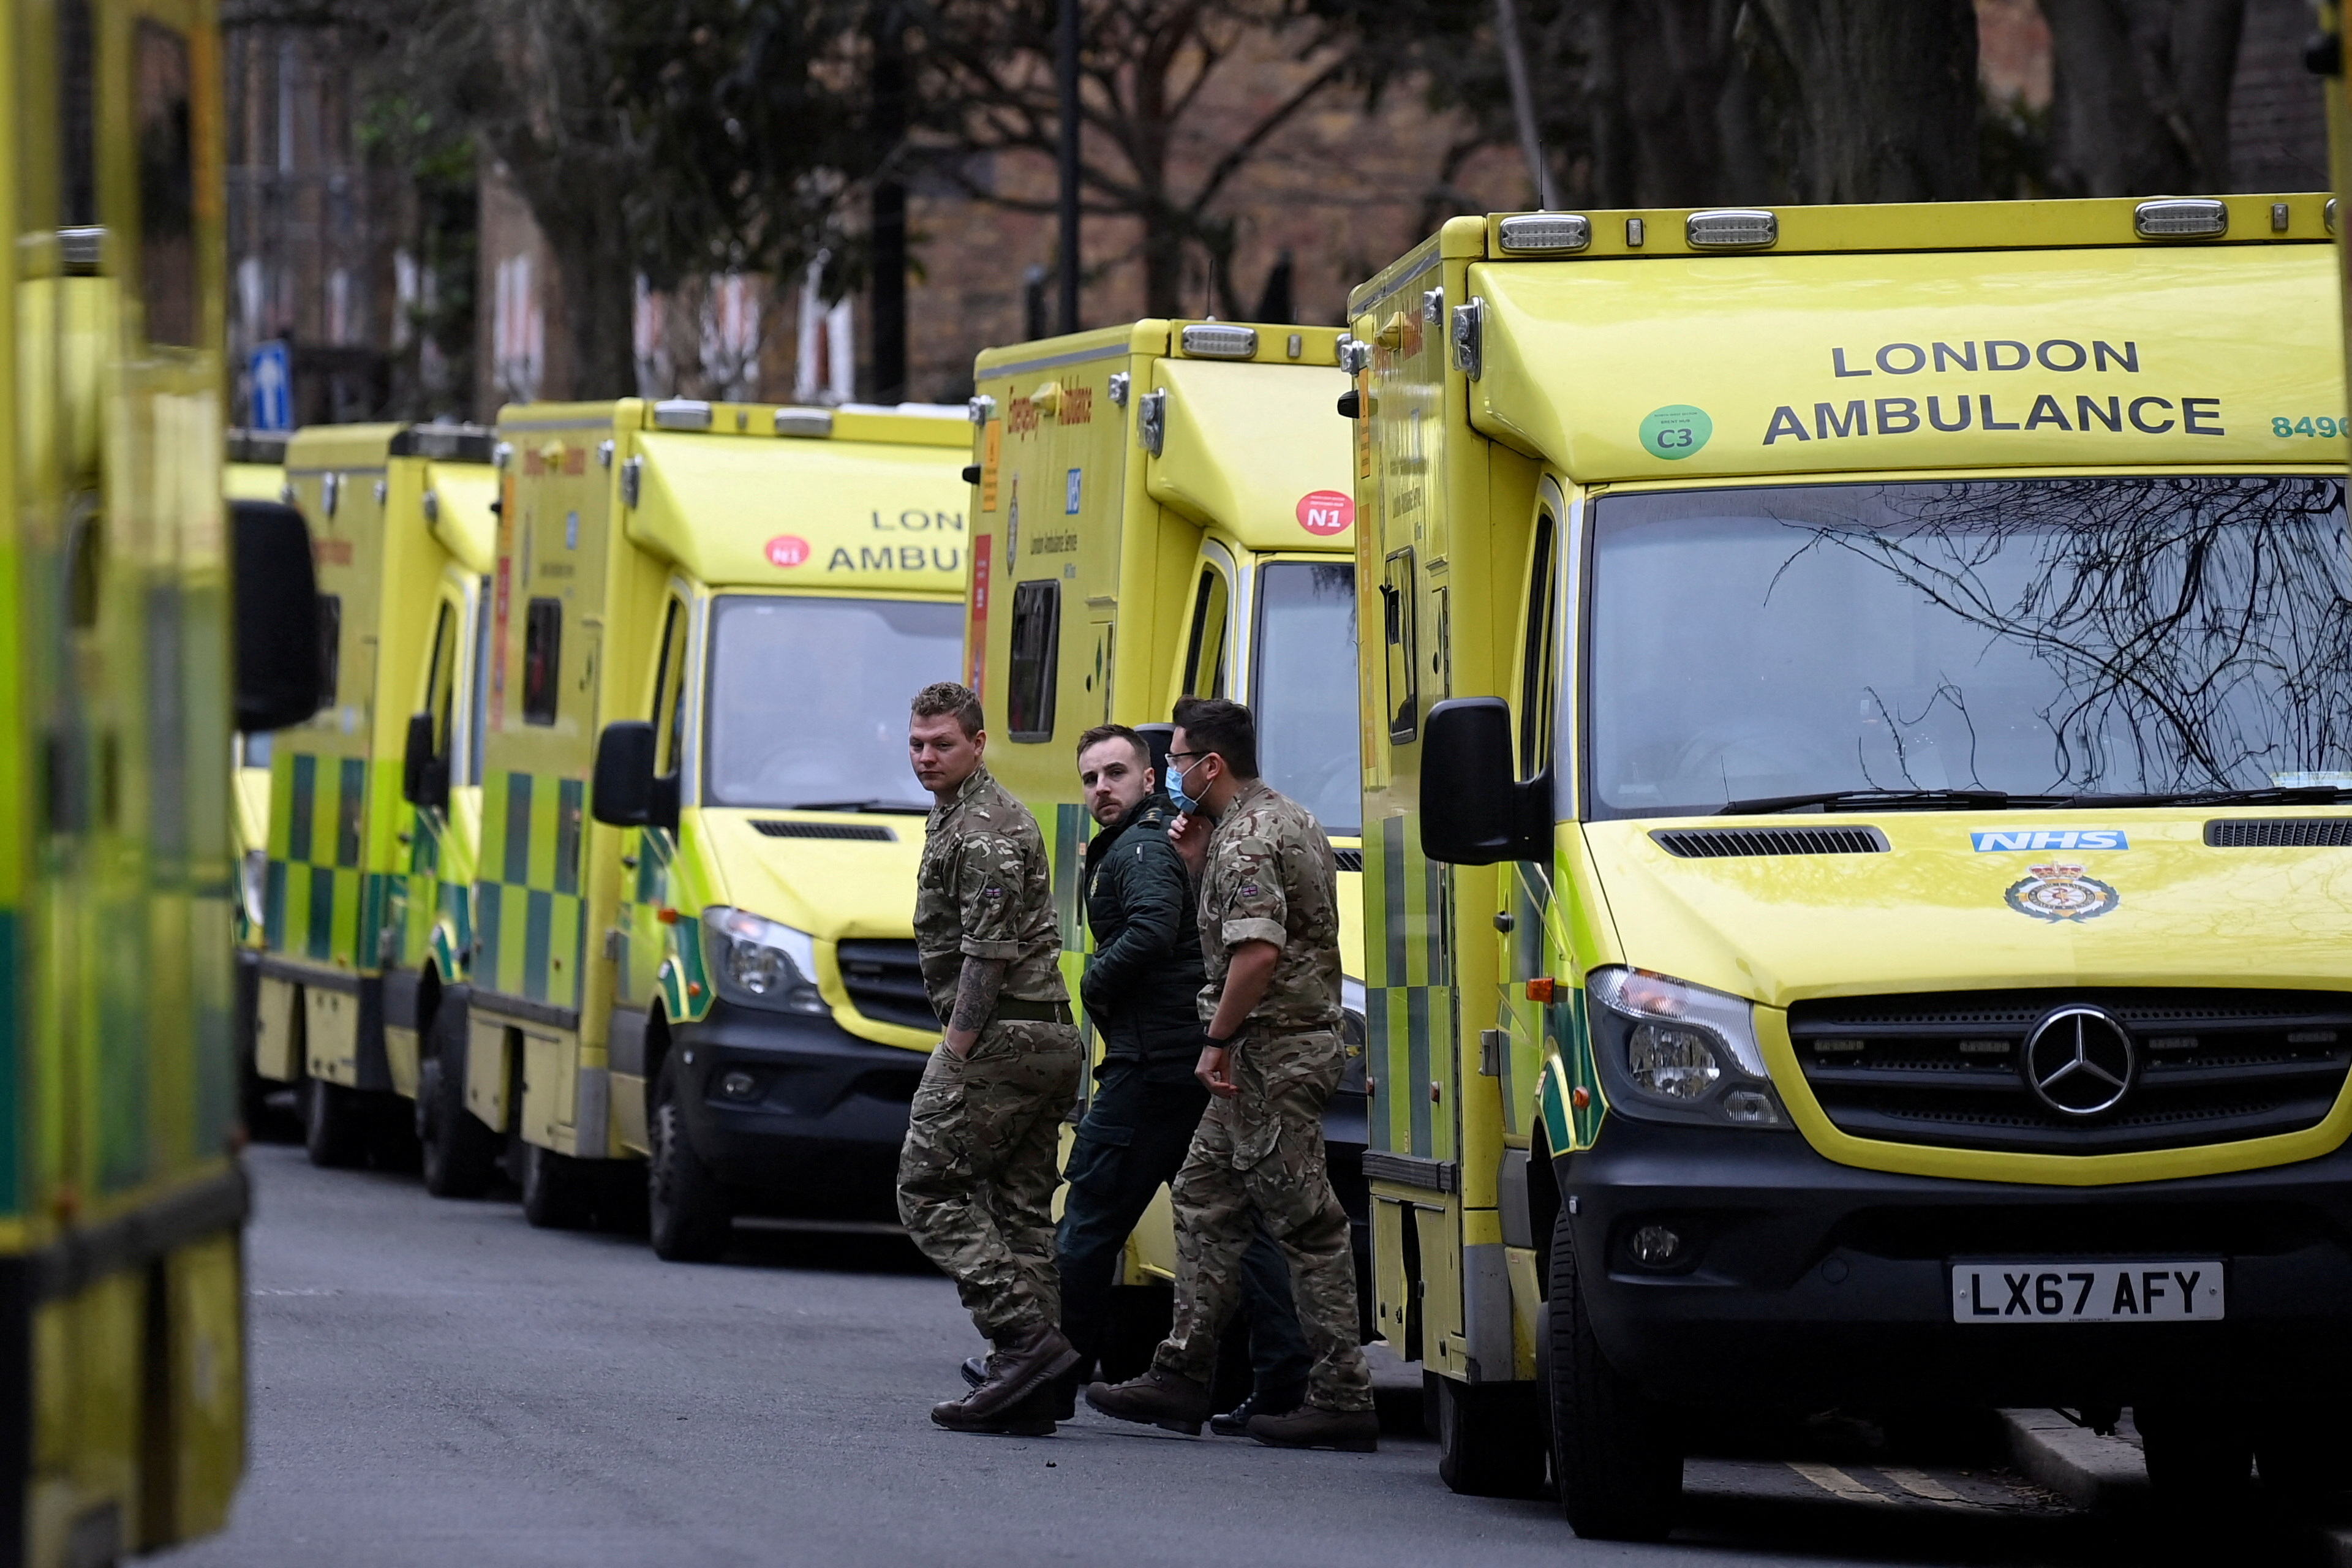 Ambulance workers take part in a strike in London